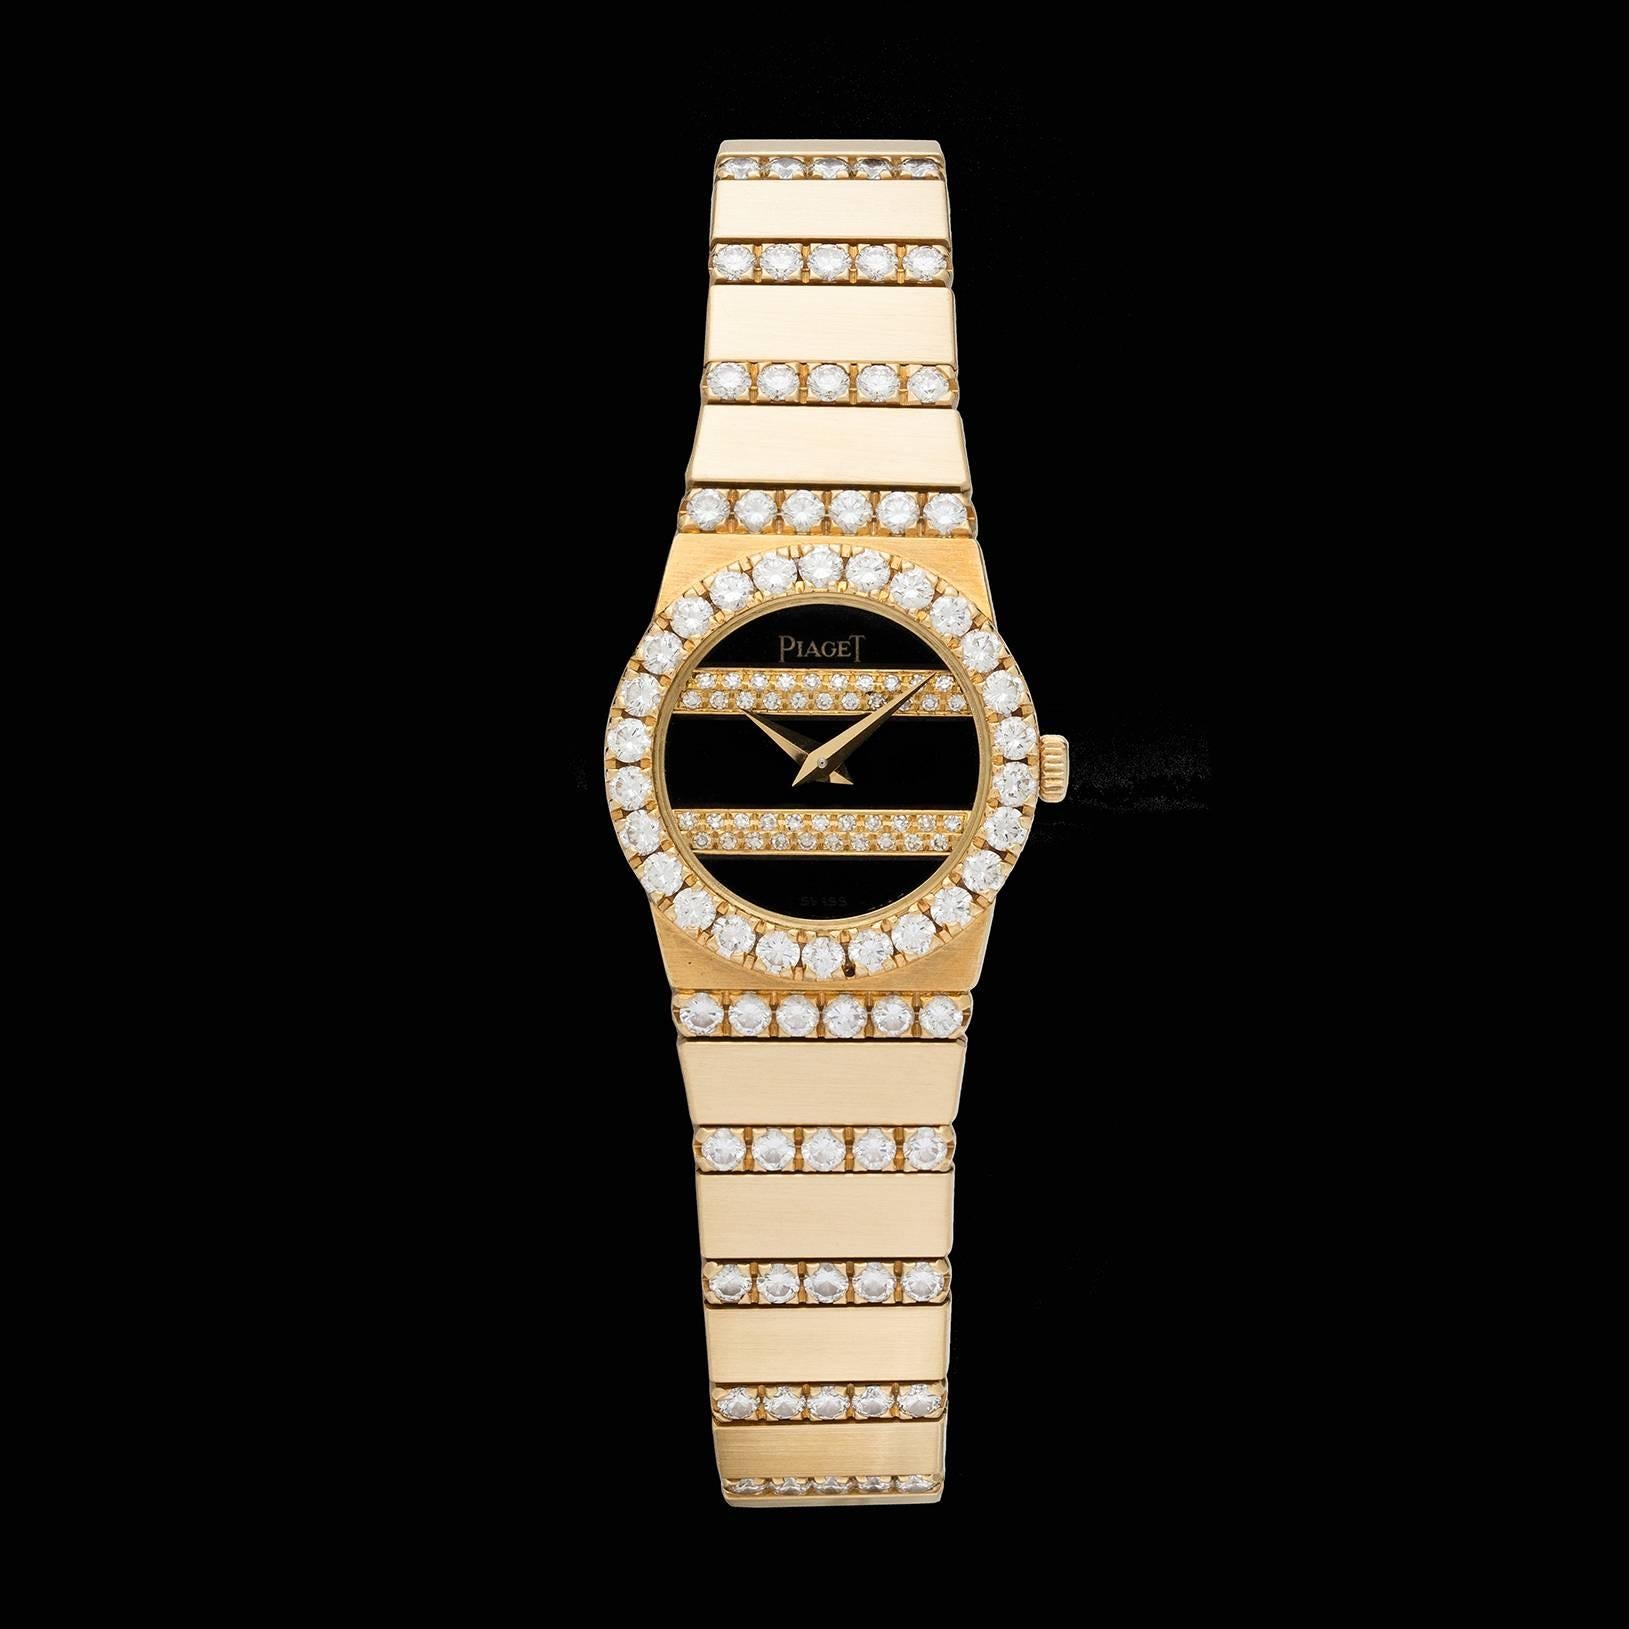 Classic Piaget Polo 18k yellow gold ladies watch with diamond bracelet, bezel, and dial combined with onyx. The watch case size is 20mm, and length of watch is 6.75 inches. Total weight is 69.2 grams. The watch movement is quartz battery operated. A